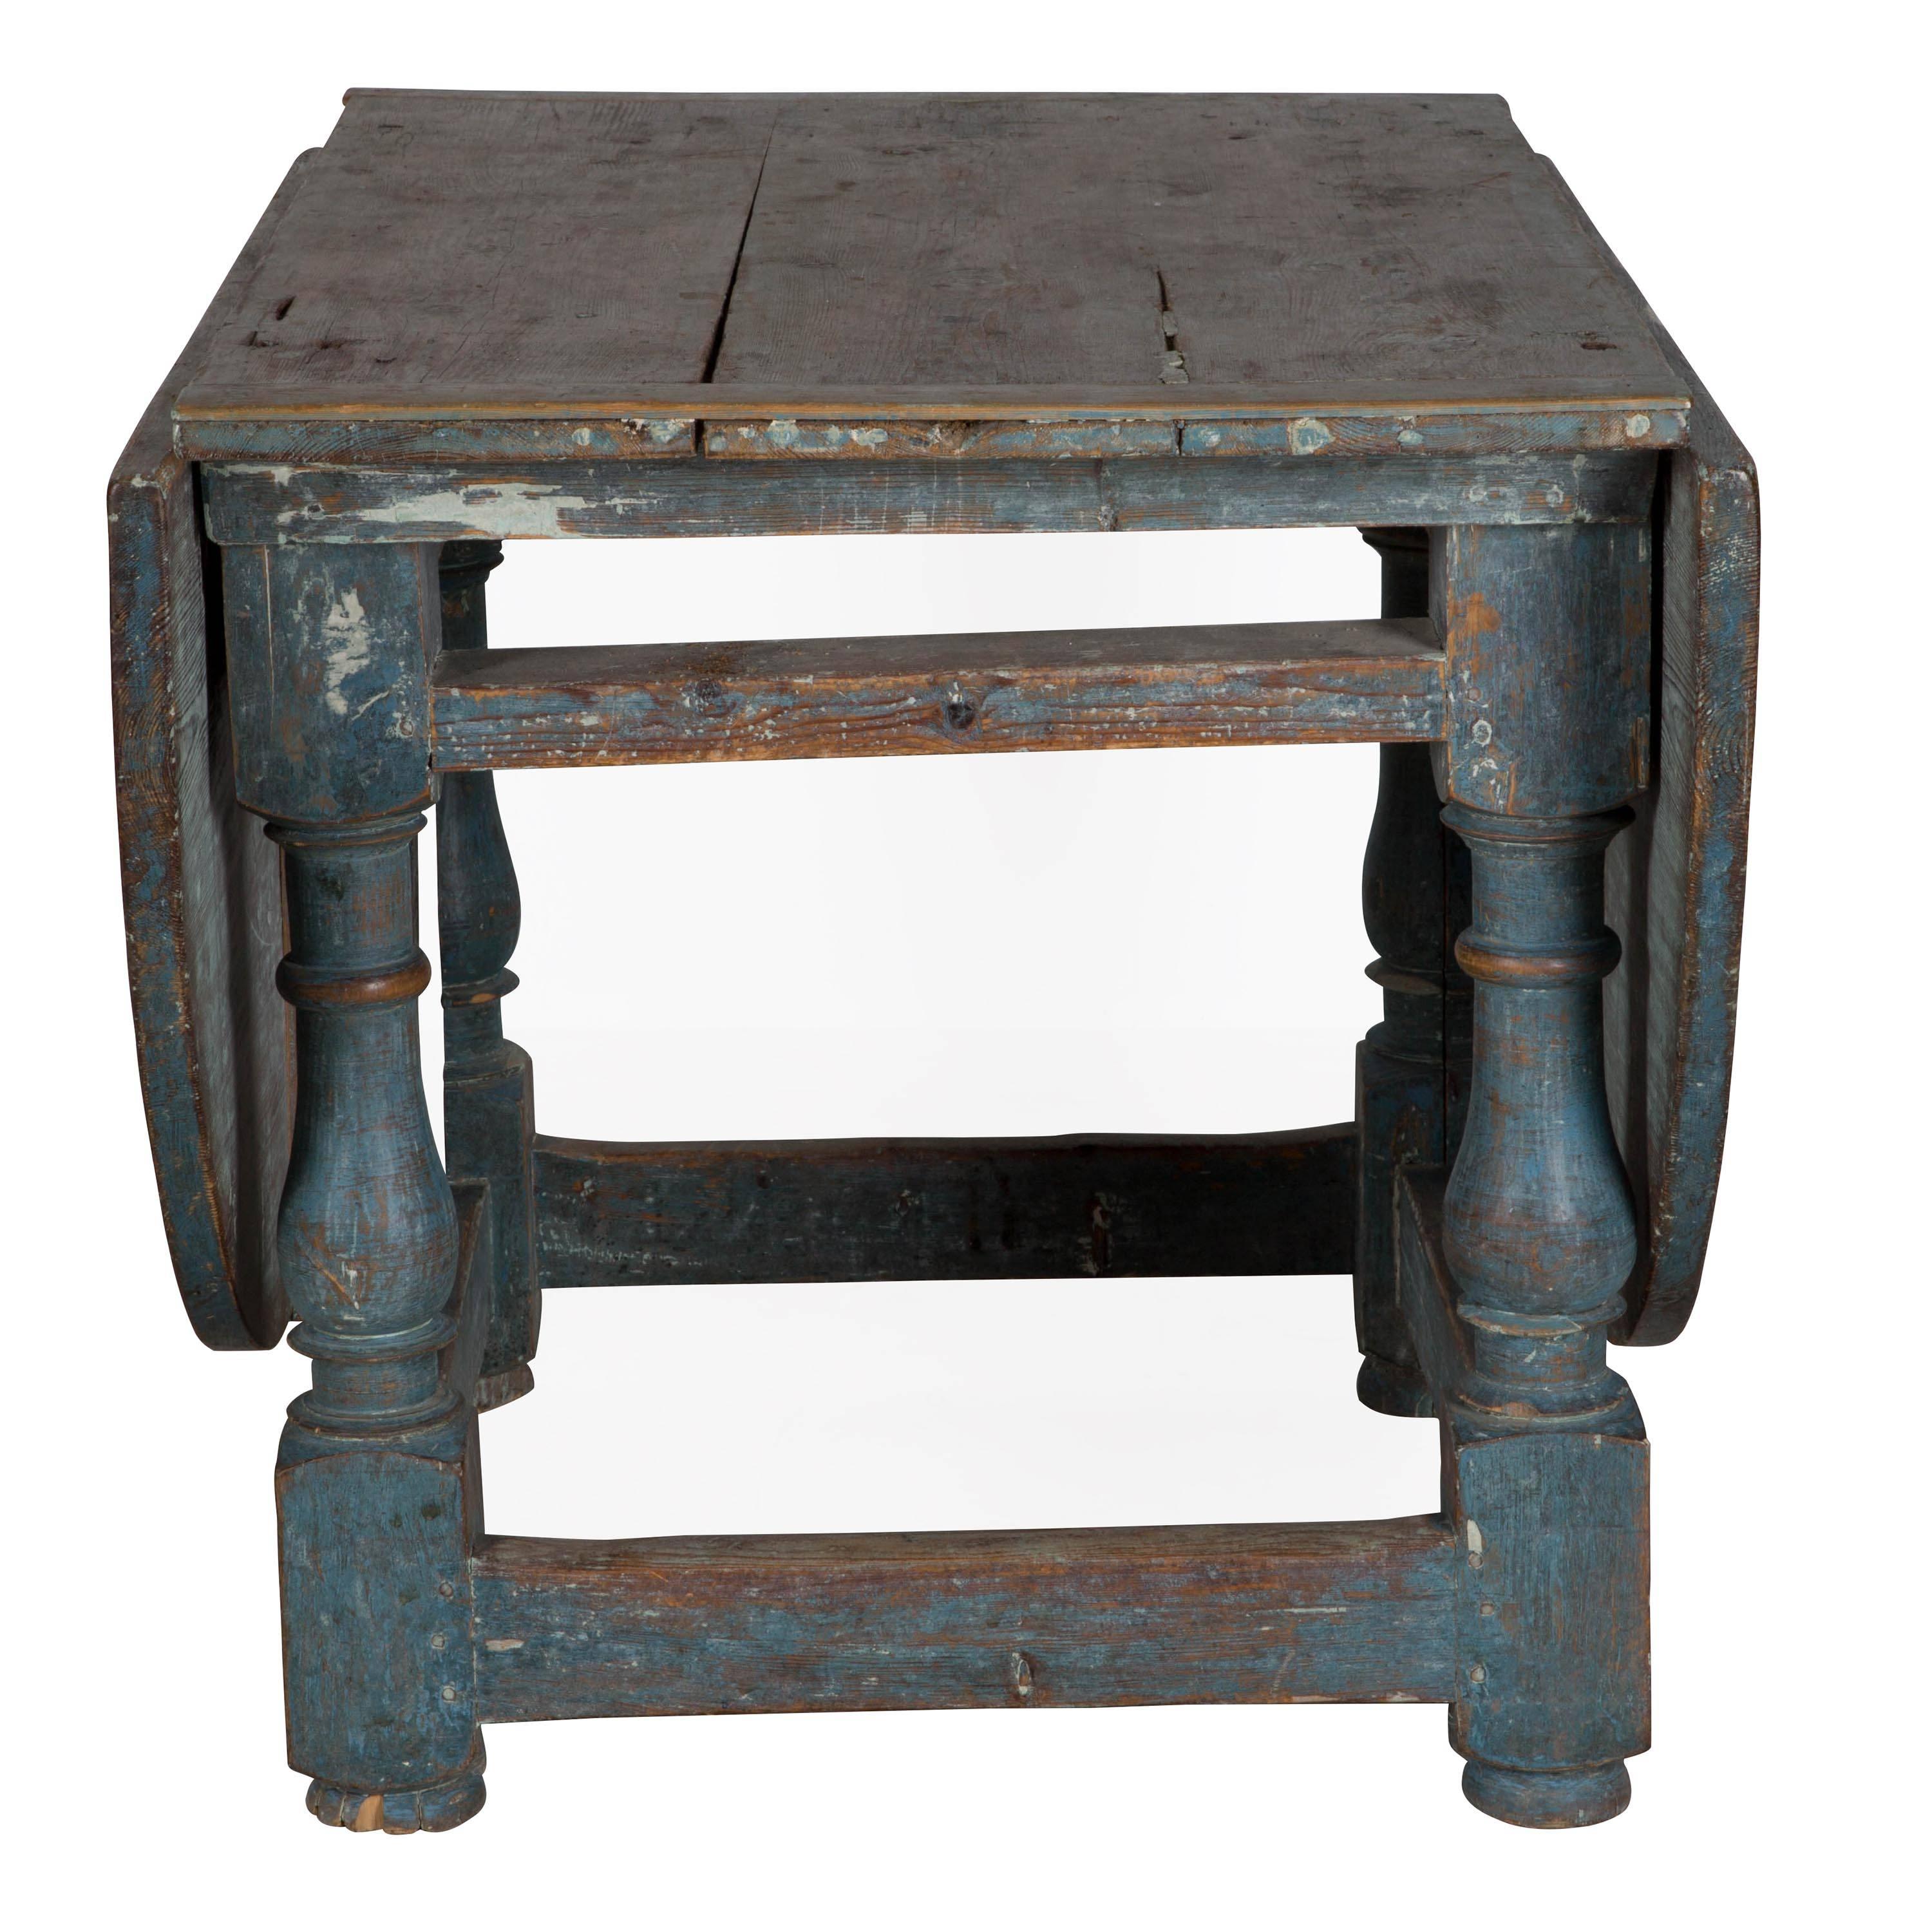 18th Century and Earlier 18th Century Swedish Drop-Leaf Dining Table